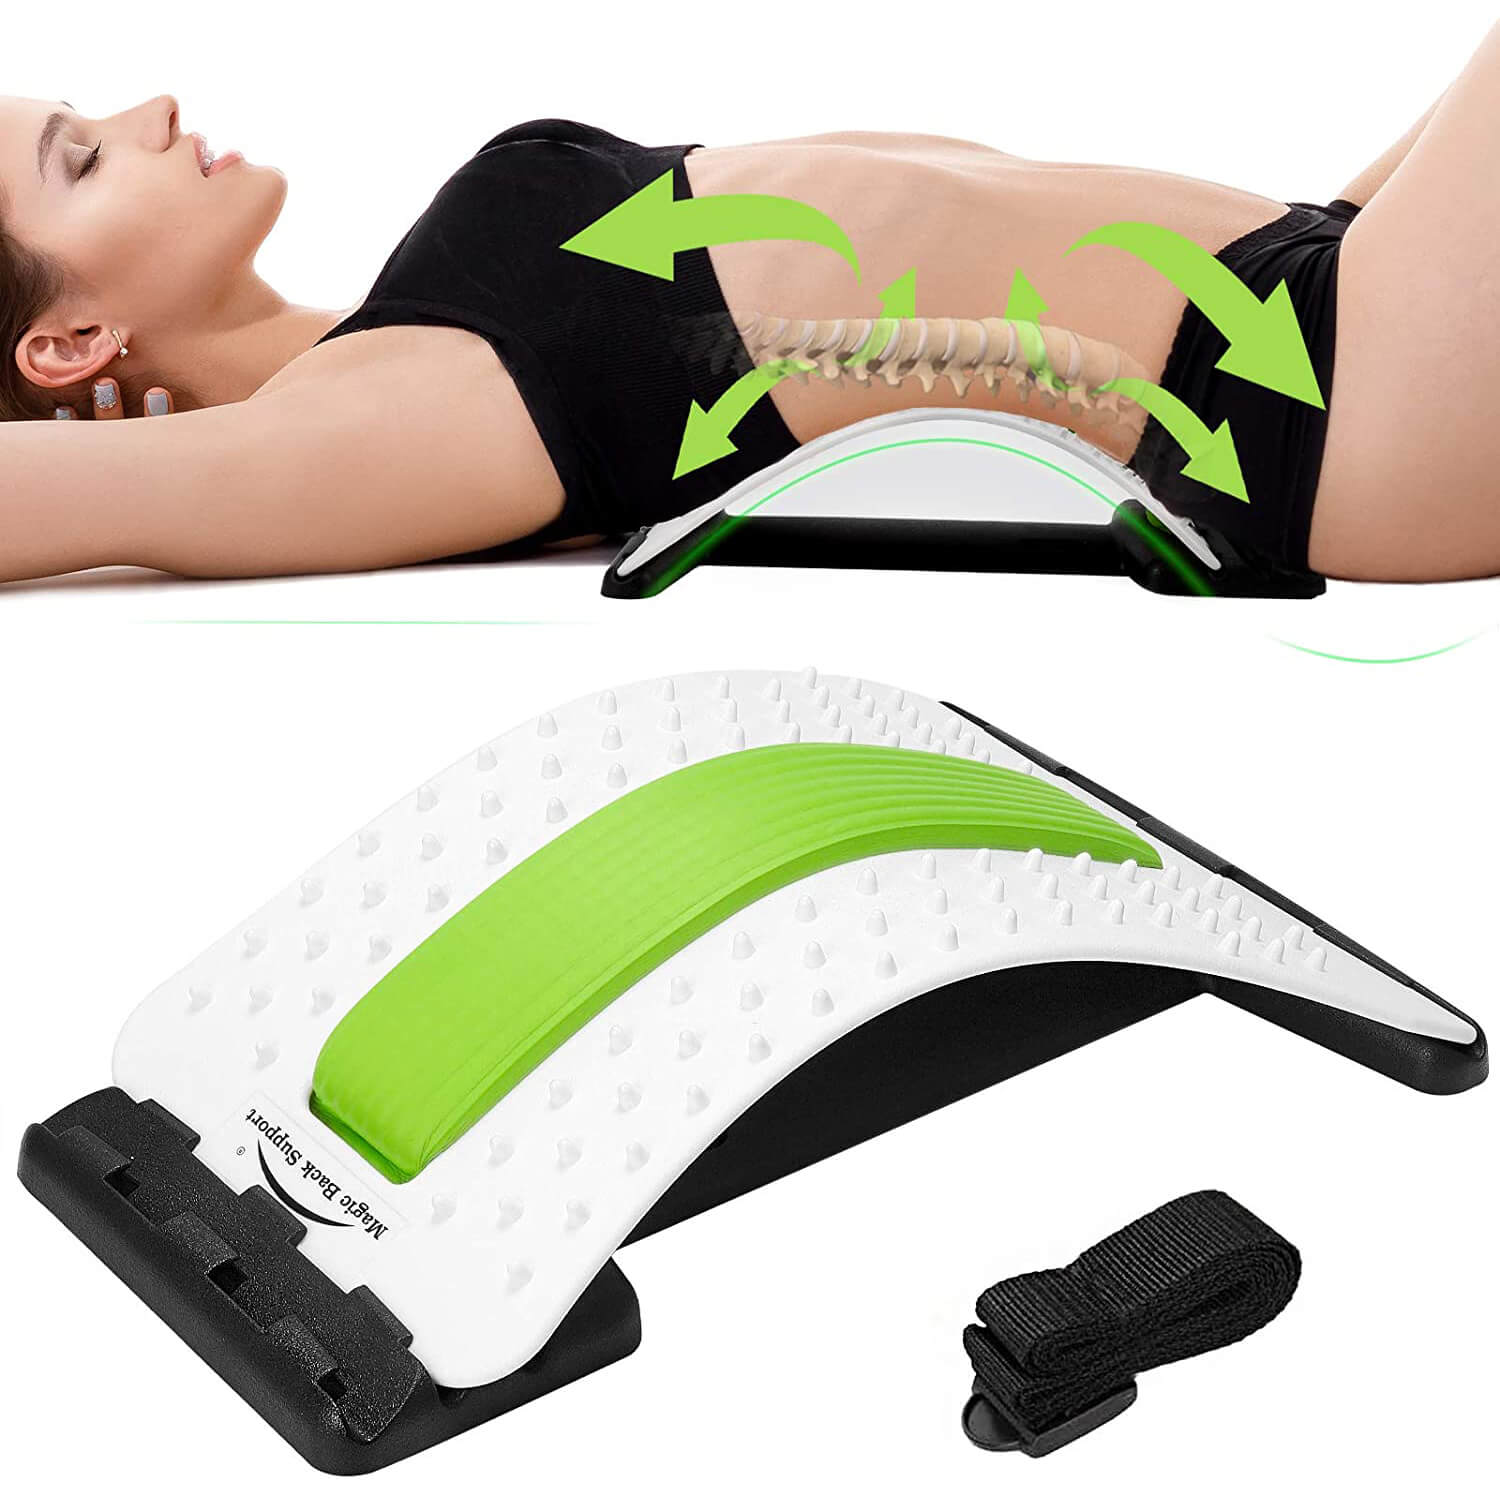 Backright Therapuetic Lumbar Stretcher for Back Support, Magic